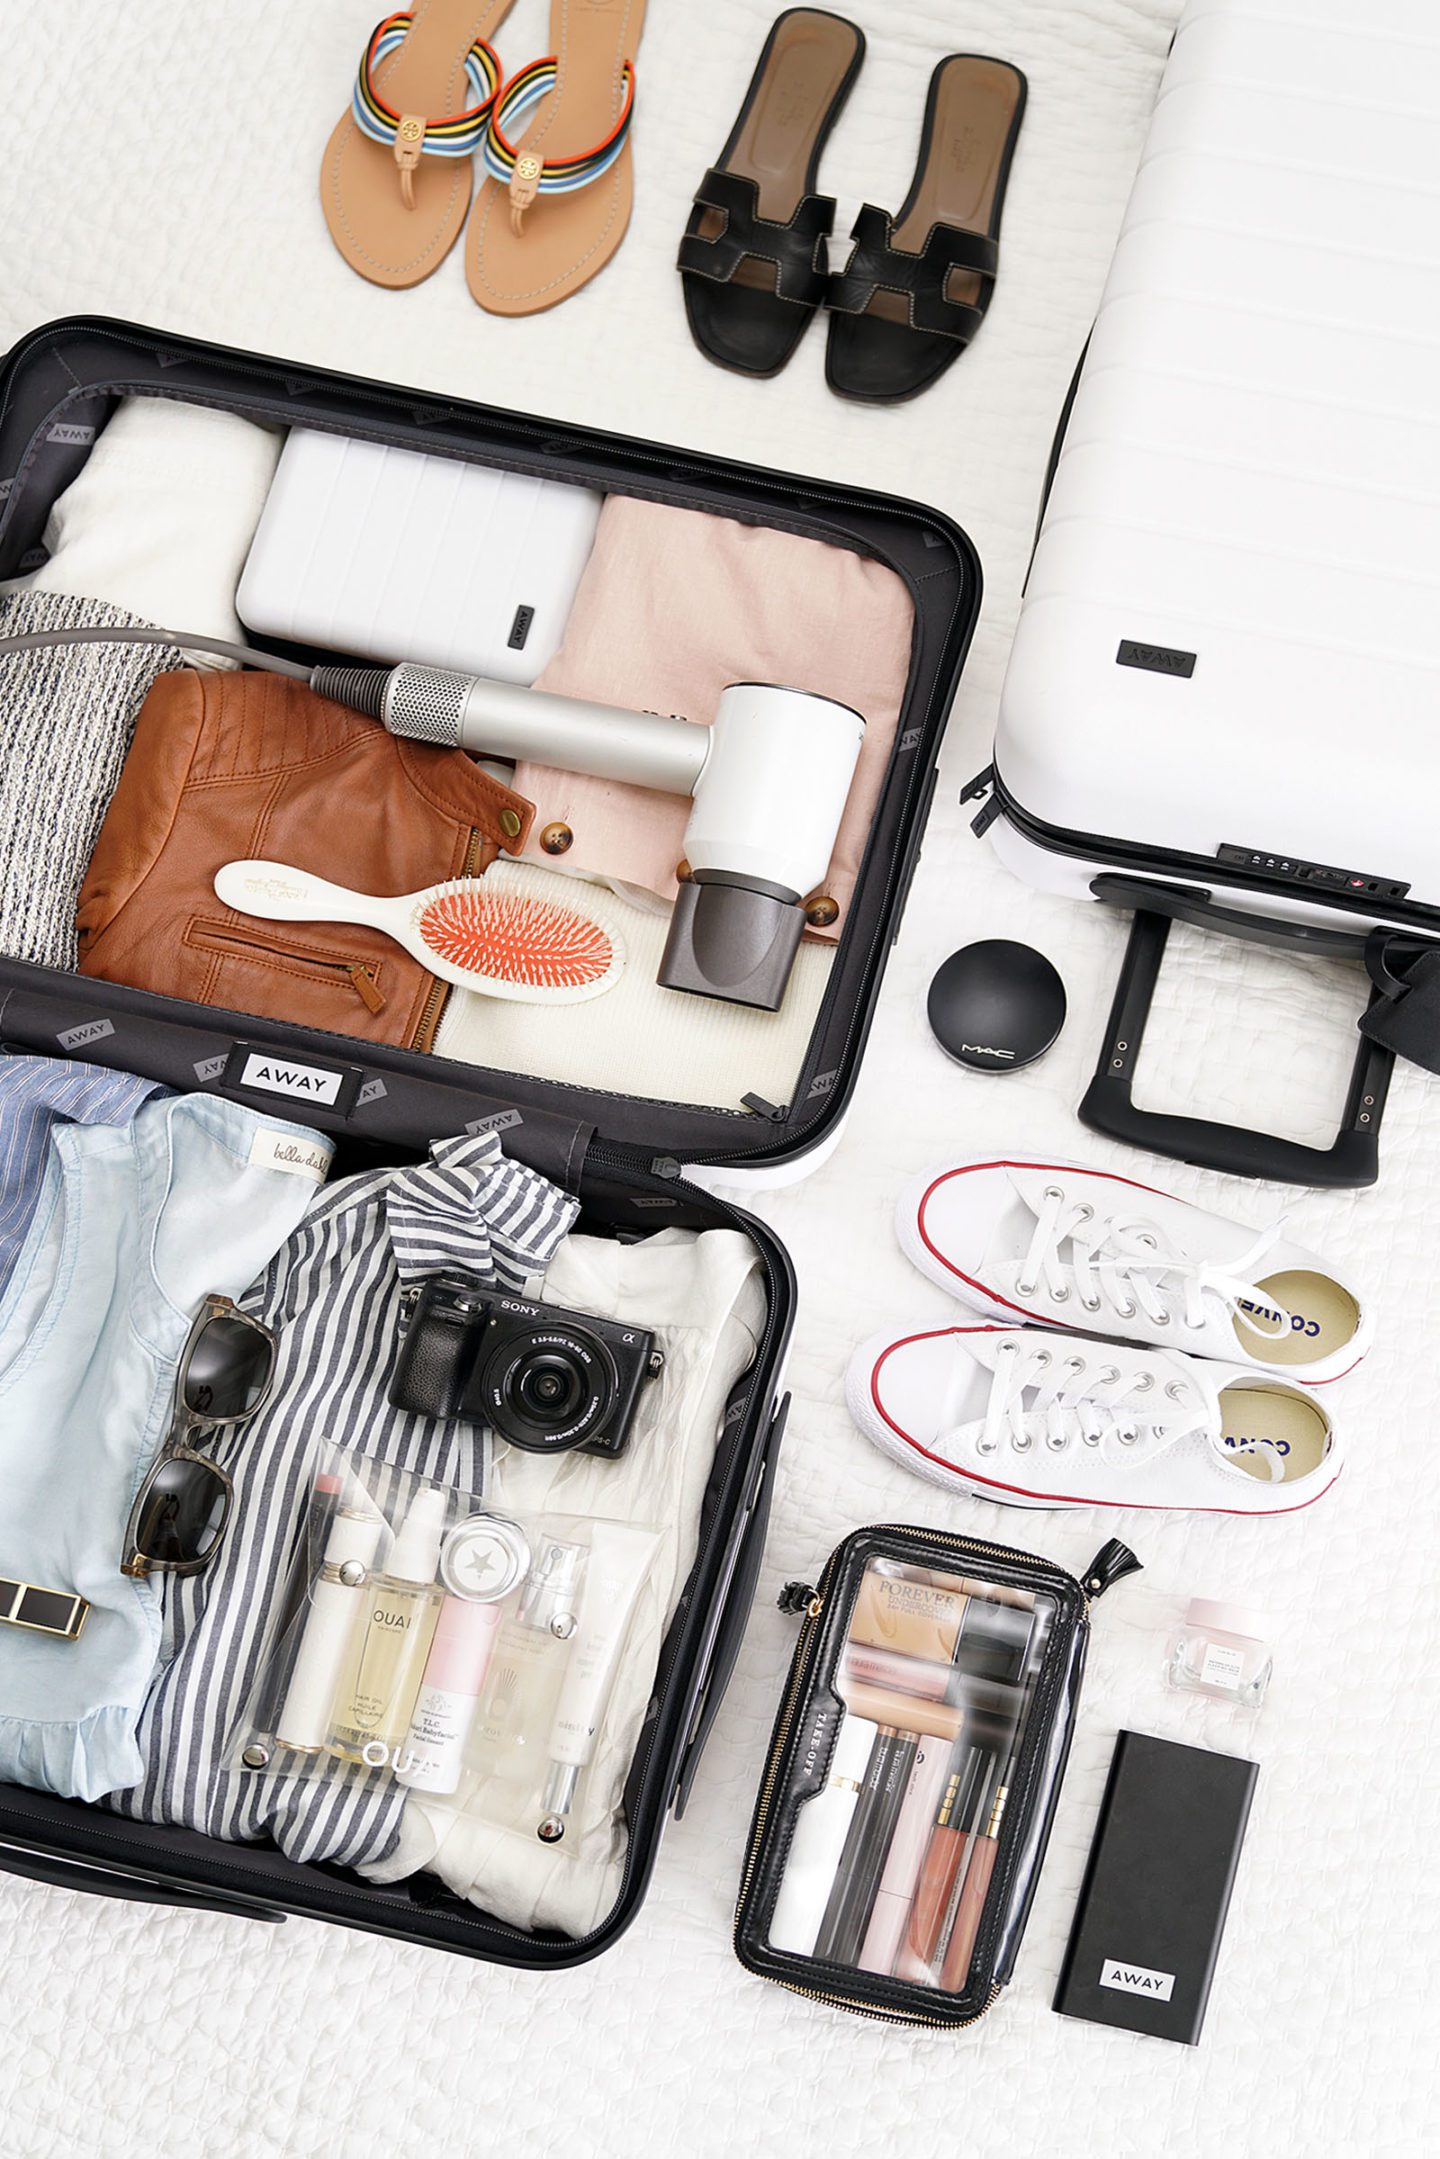 Away Bigger Carry-On Packing for a Week in NYC | The Beauty Look Book